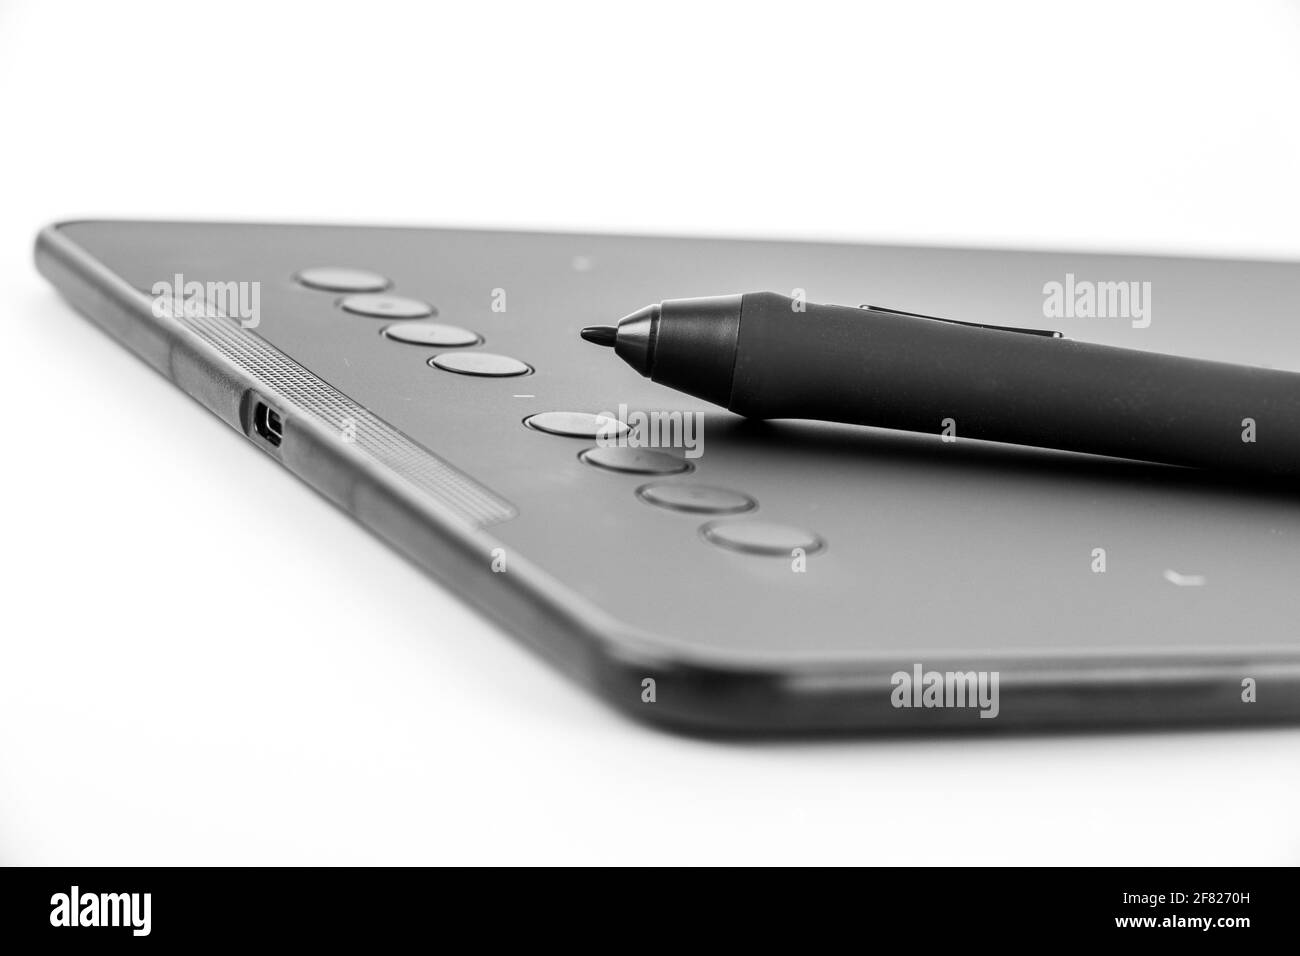 Black graphic tablet with pen for illustrators, designers and photographers, isolated on white background. Stock Photo